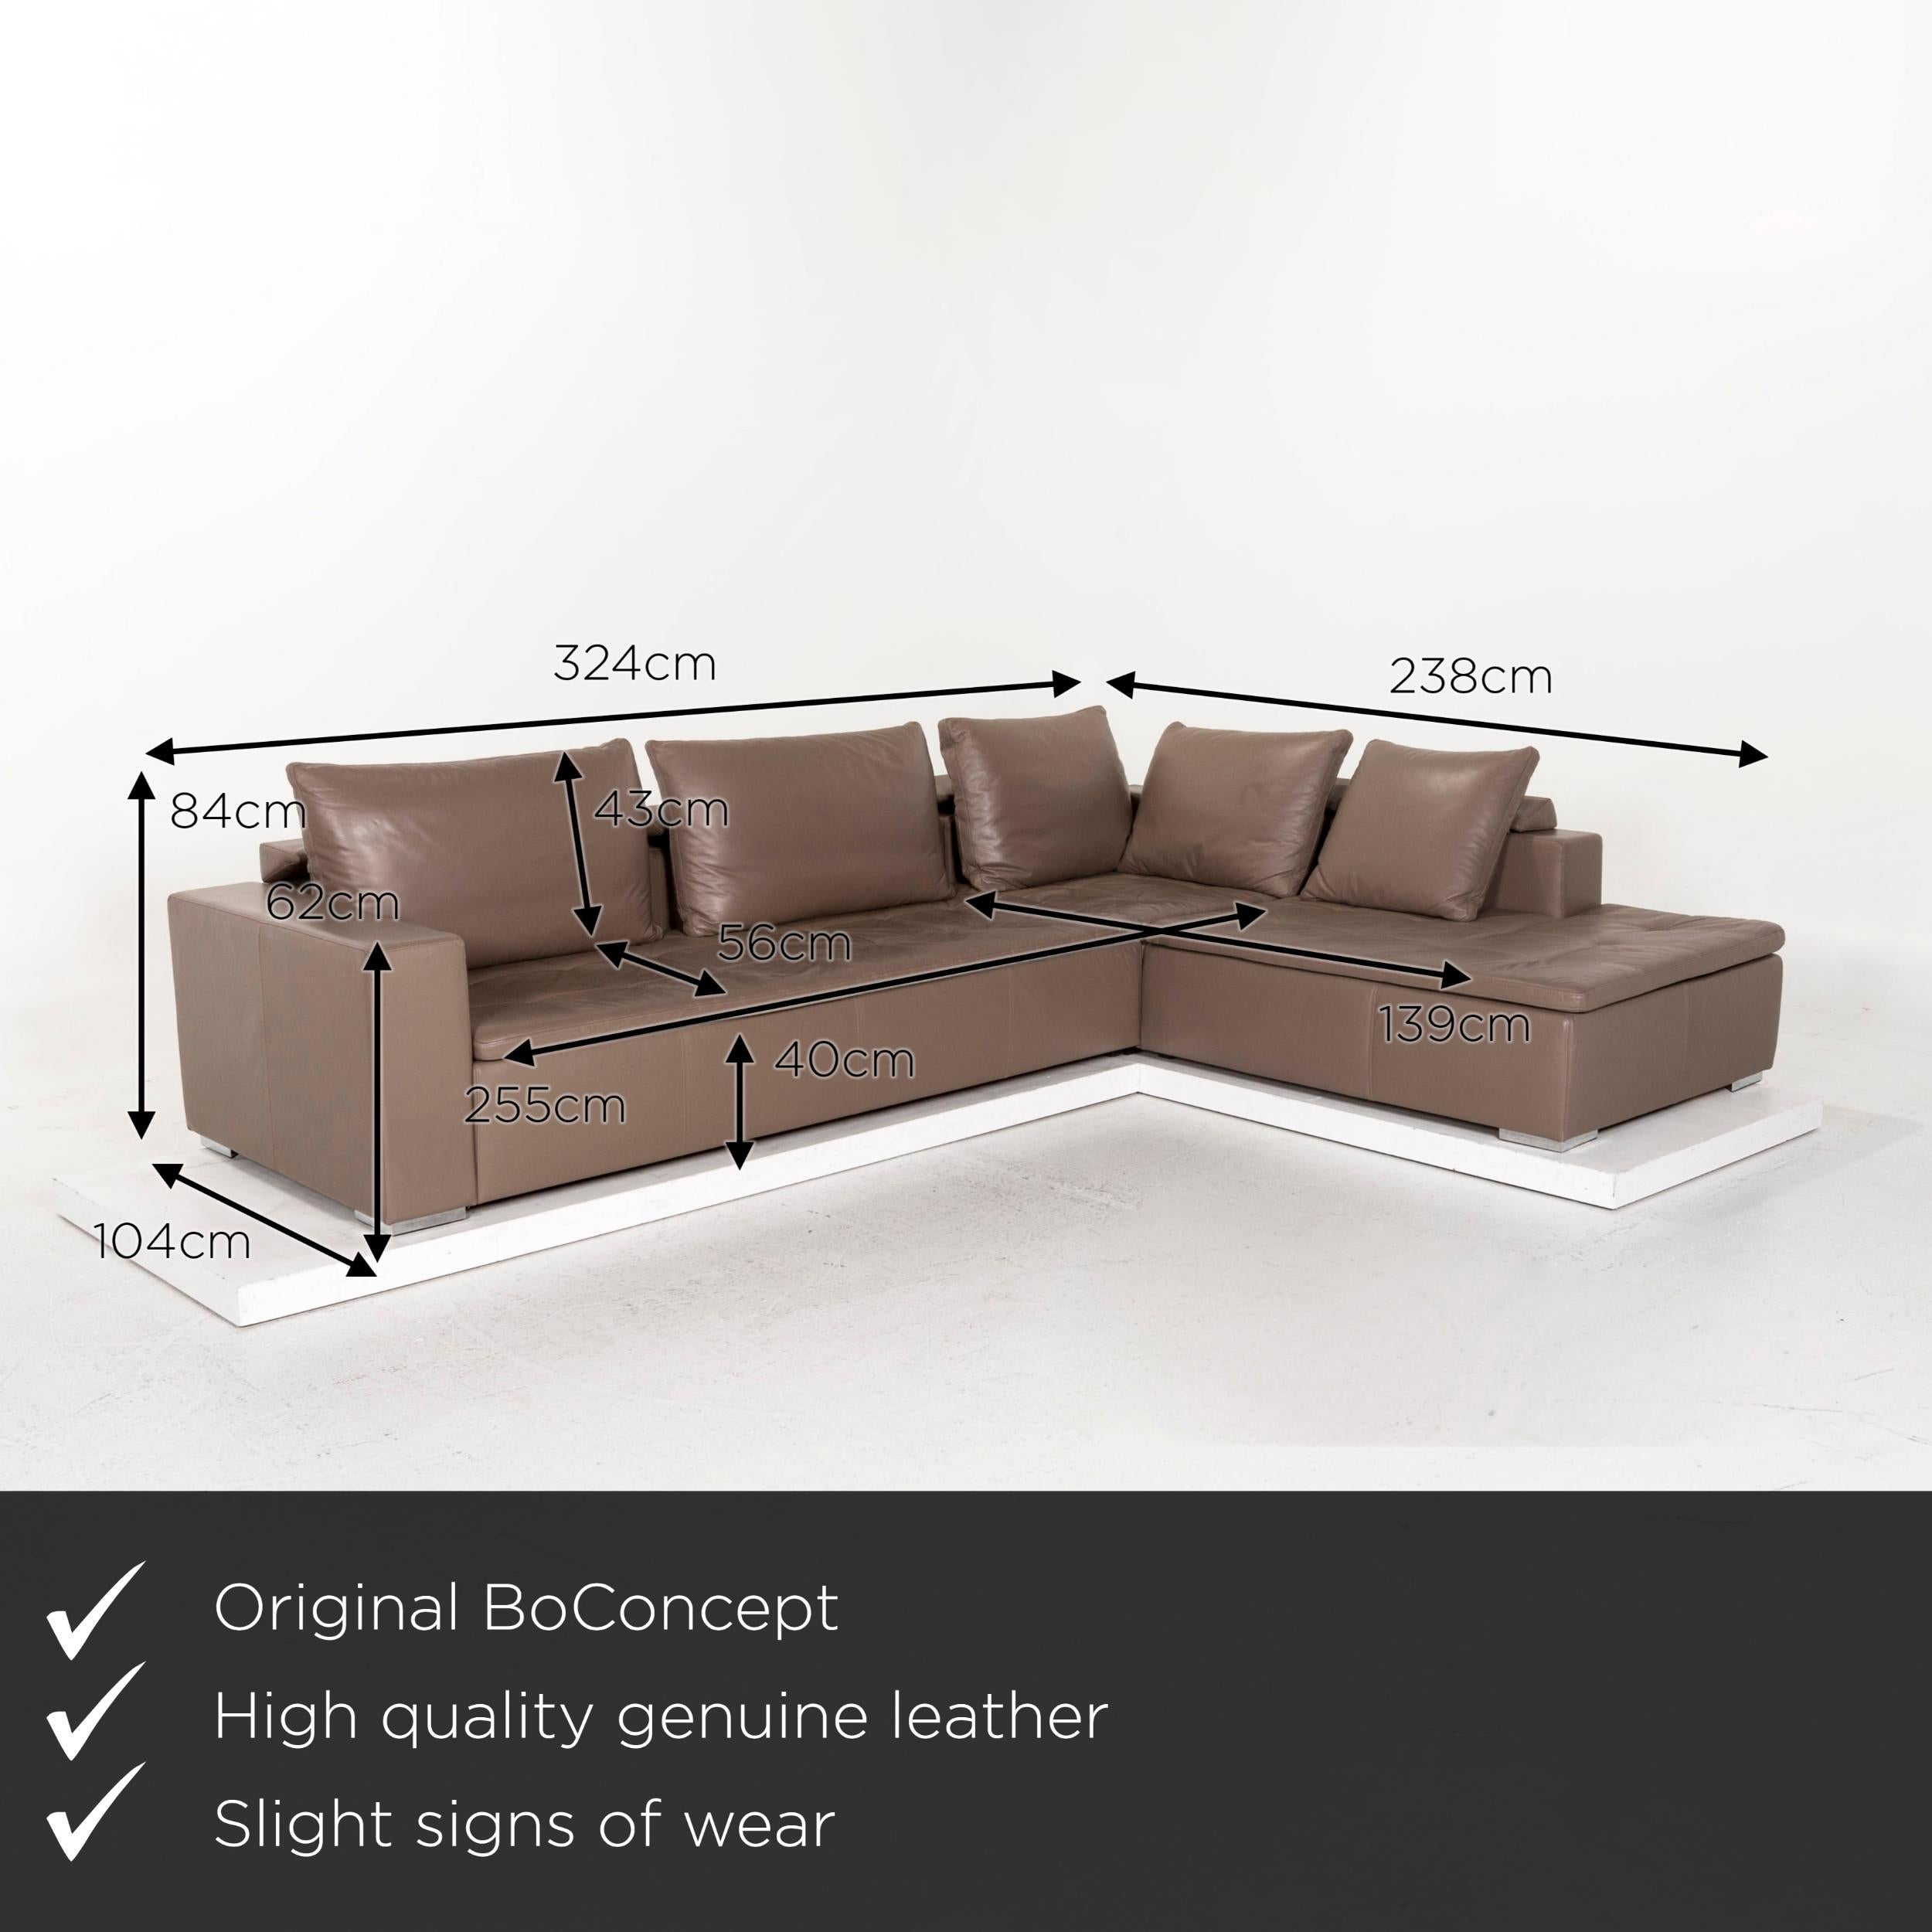 We present to you a BoConcept Mezzo leather sofa set brown gray brown 1 corner sofa 1 stool.
 
 

 Product measurements in centimeters:
 

Depth 104
Width 324
Height 84
Seat height 40
Rest height 62
Seat depth 56
Seat width 255
Back